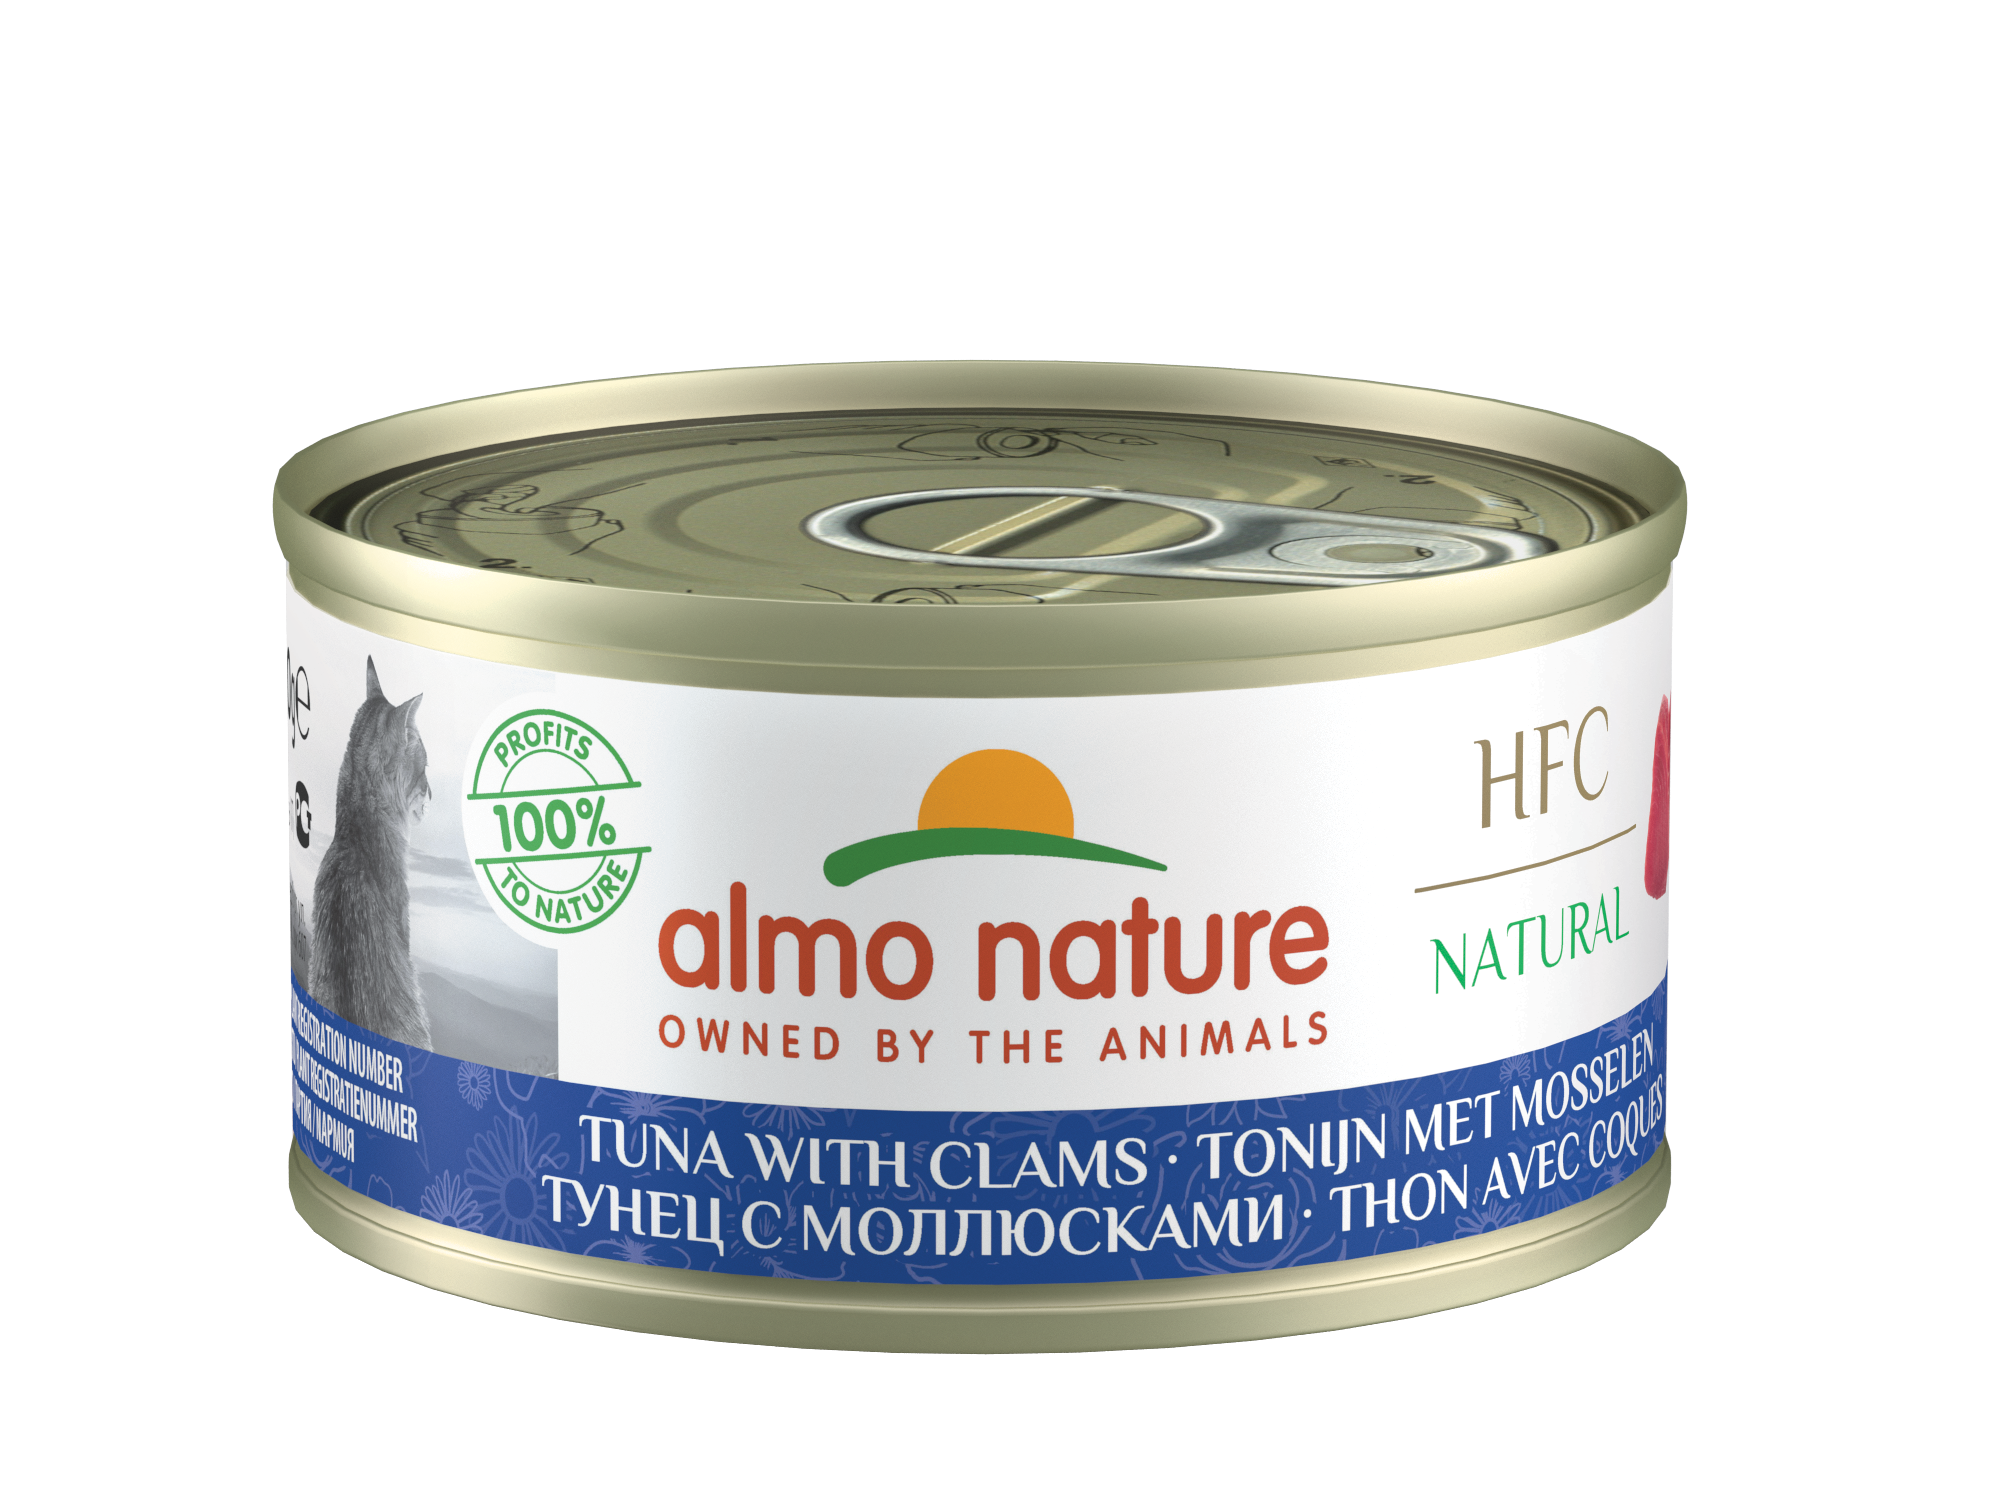 Almo Nature - HFC Natural Tuna with Clams 70g for Cats